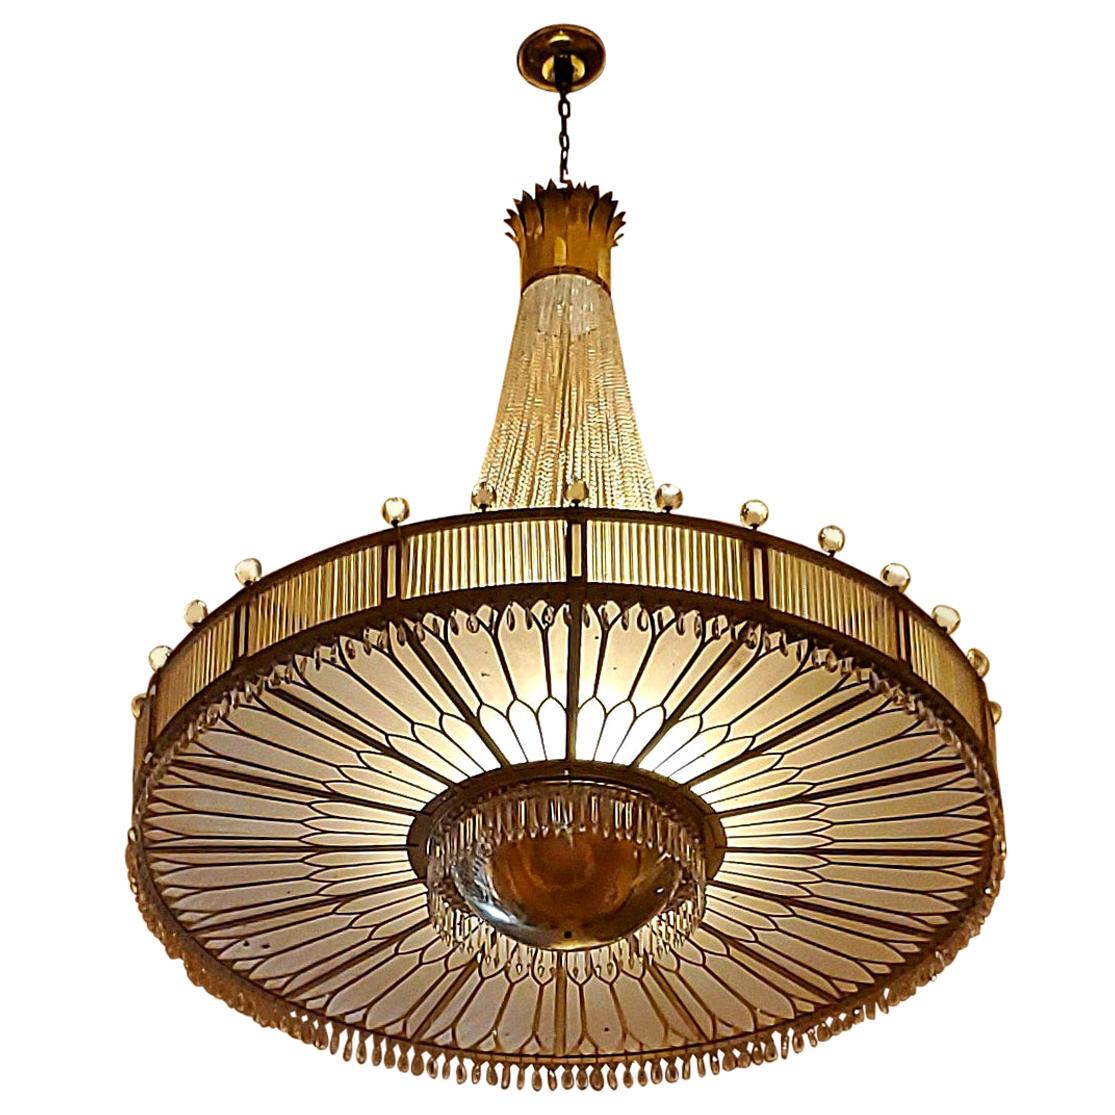 Monumental Midcentury Art Deco Style Ballroom Chandelier with Provenance For Sale